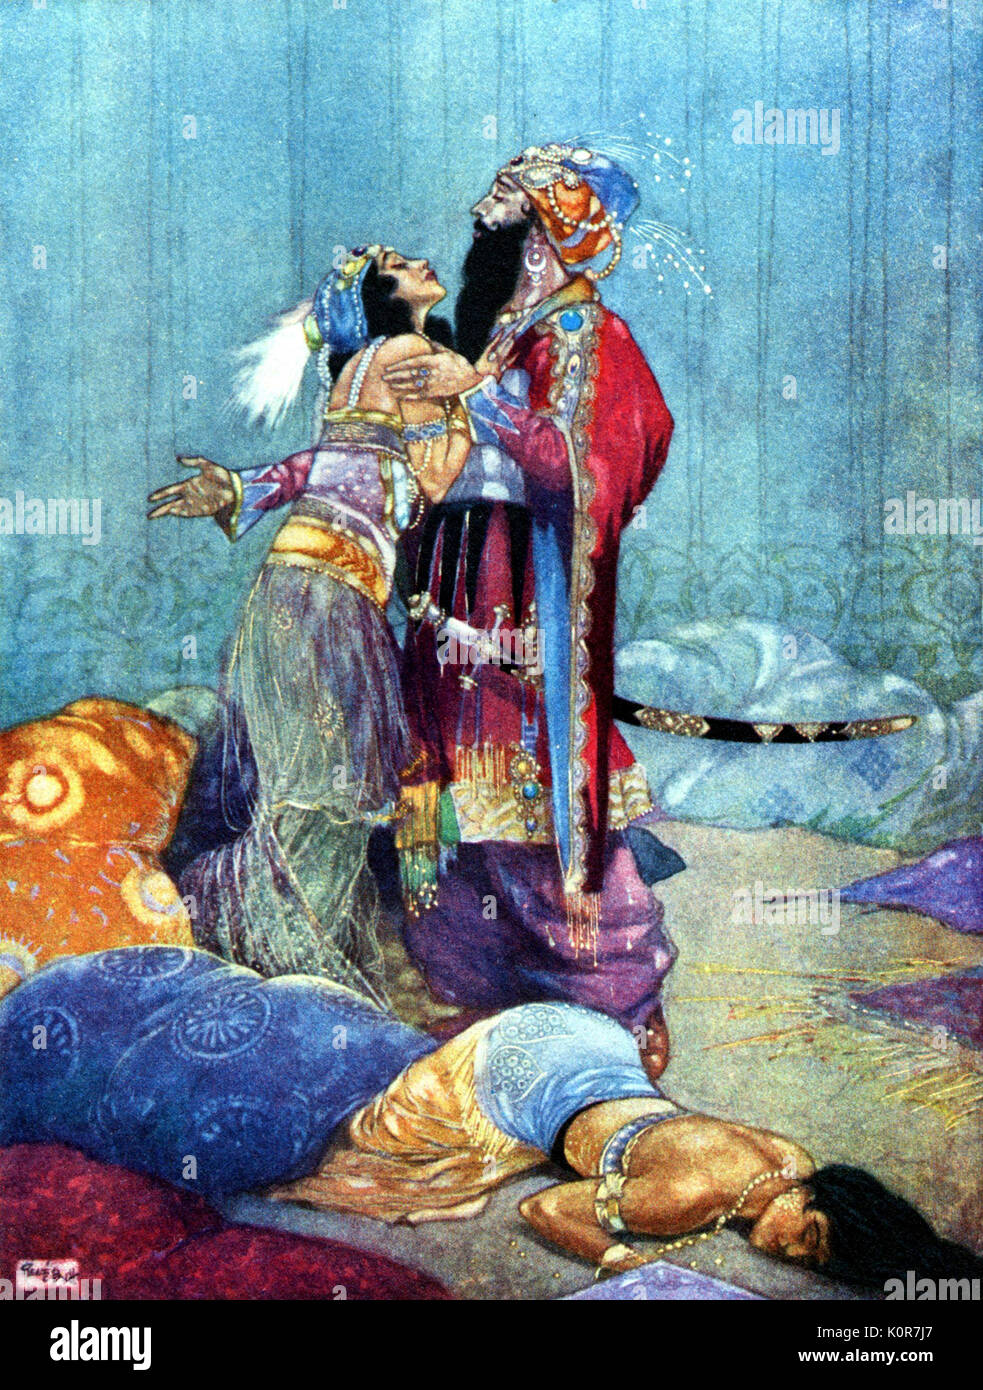 Nicolai Rimsky-Korsakov ' s ballet Sheherazade / Scheherazade - painted by René BULL. Scheherazade ensnares the Sultan / Caliph with her tales of 1001 Arabian nights. 1913. Russian composer, 18 March 1844 - 21 June 1908. Stock Photo